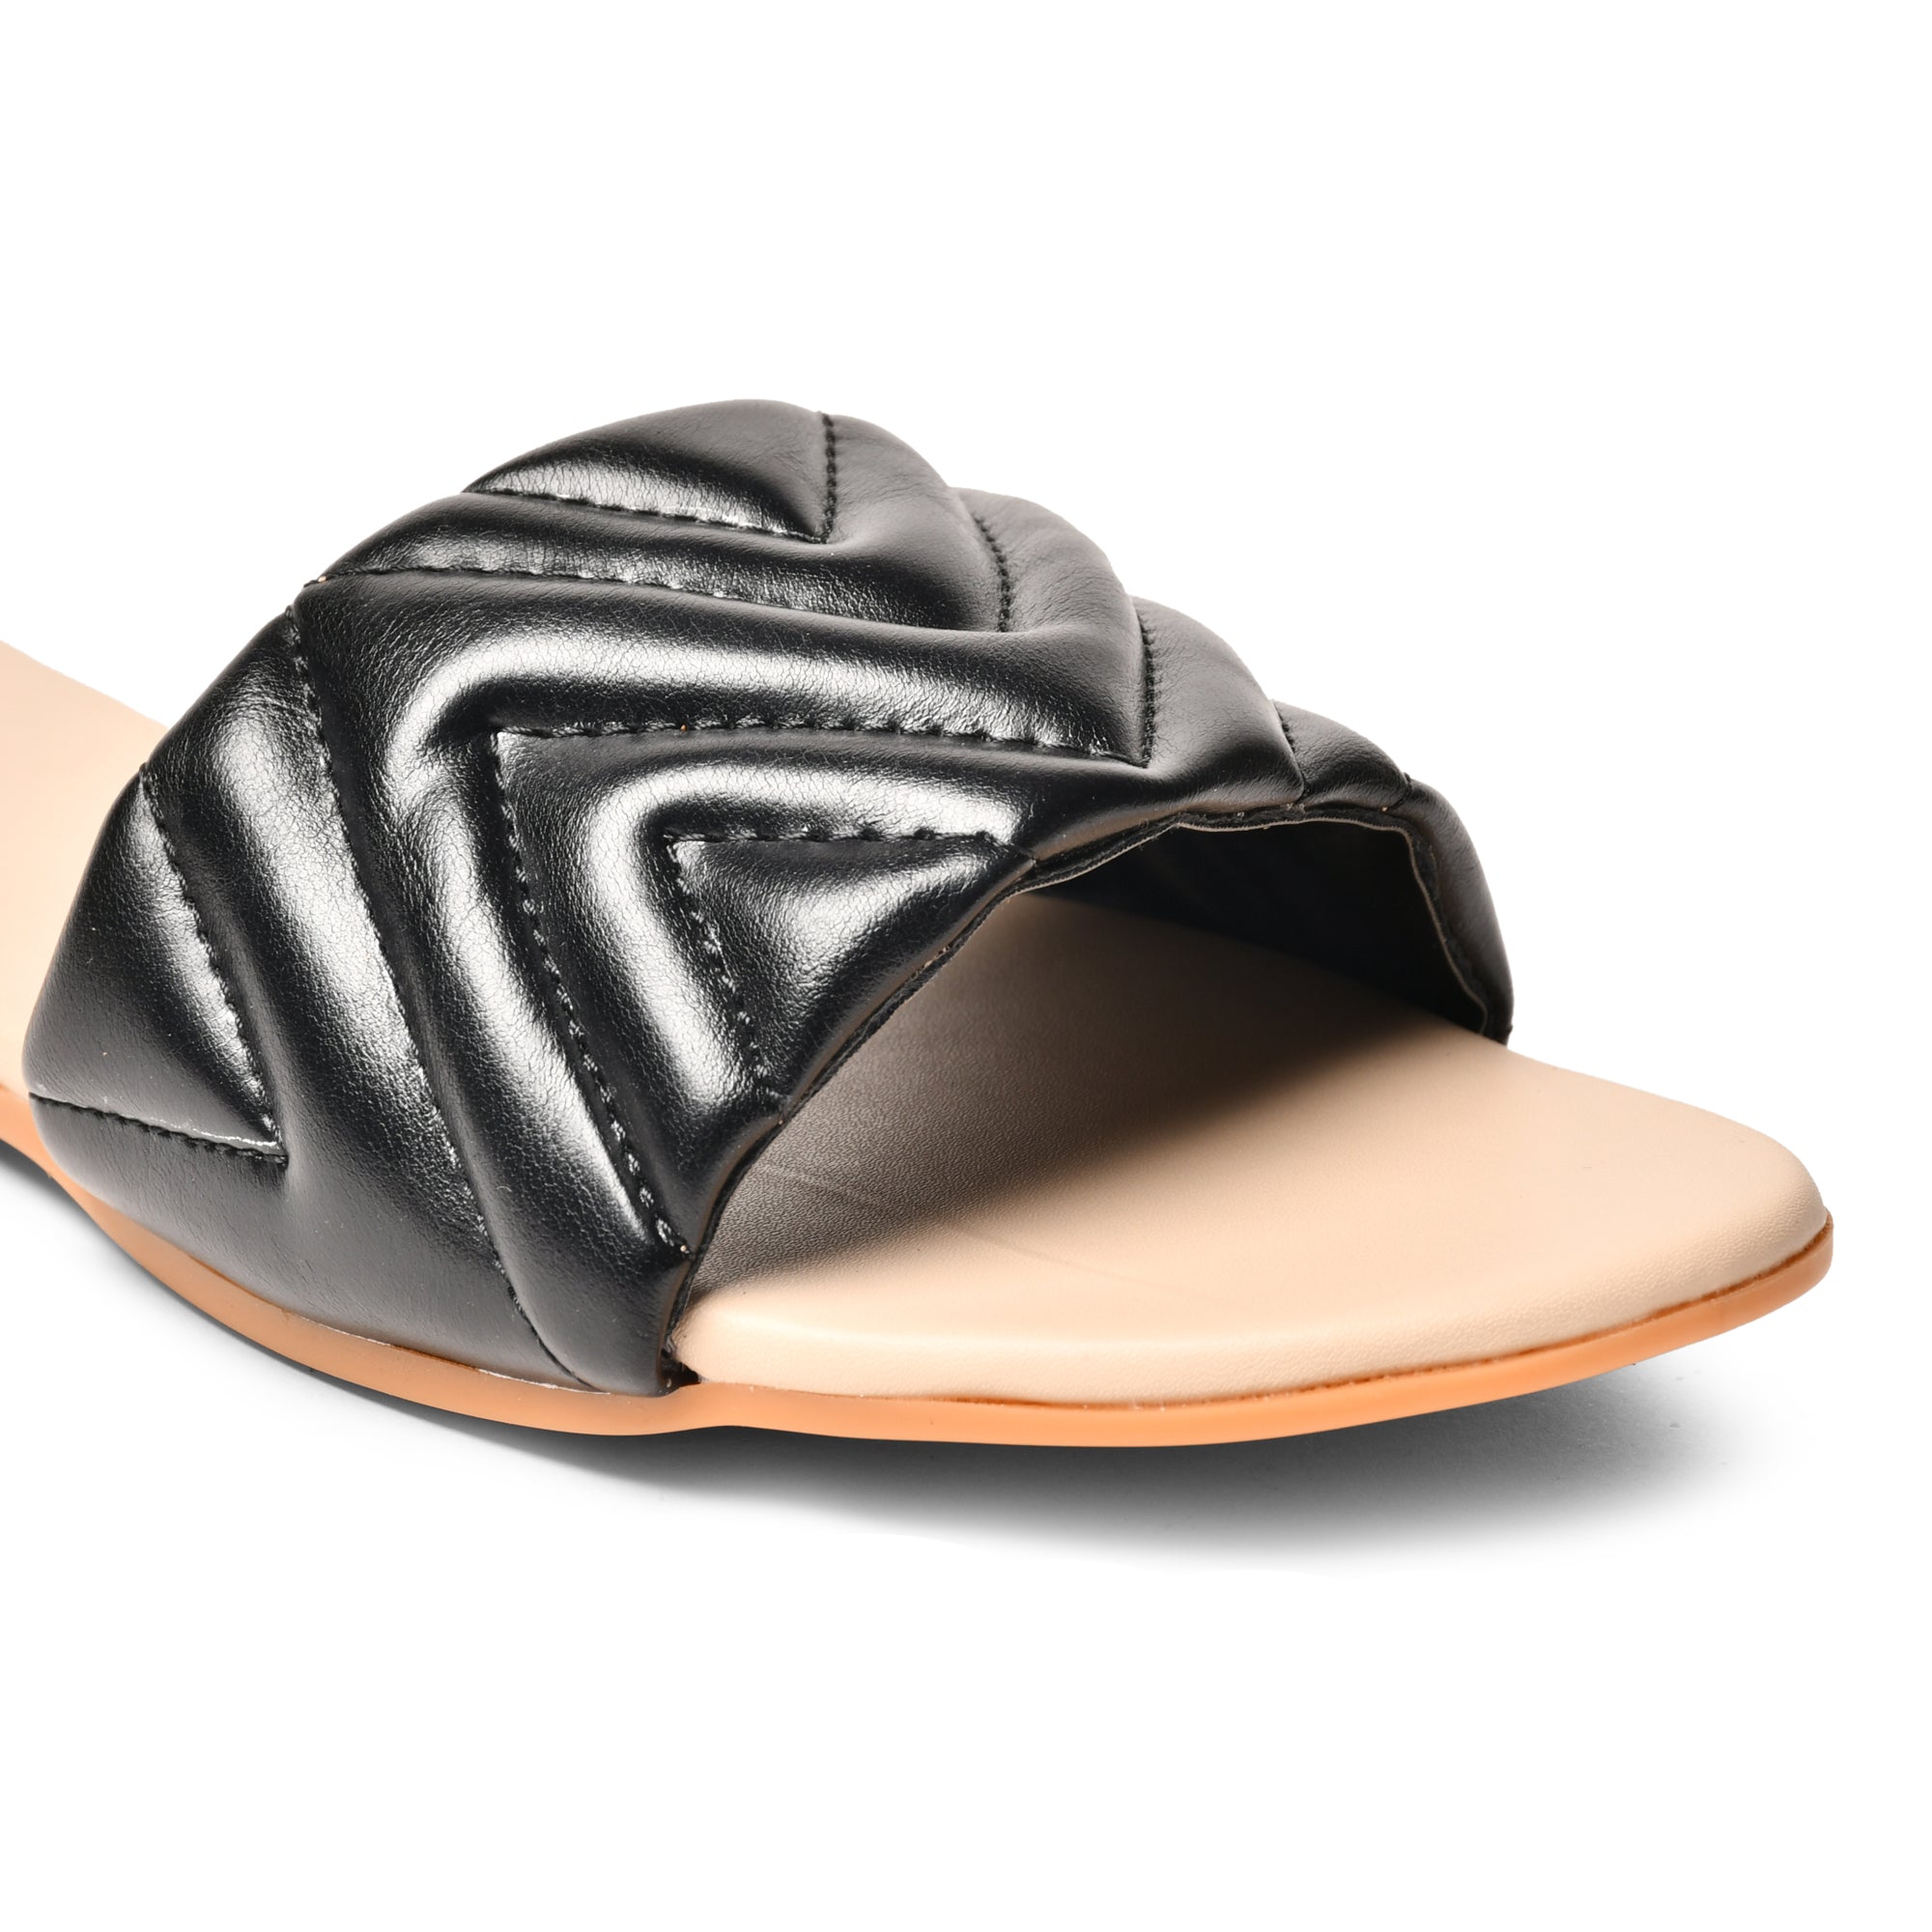 GNIST GG Quilted Faux Leather Black Flats